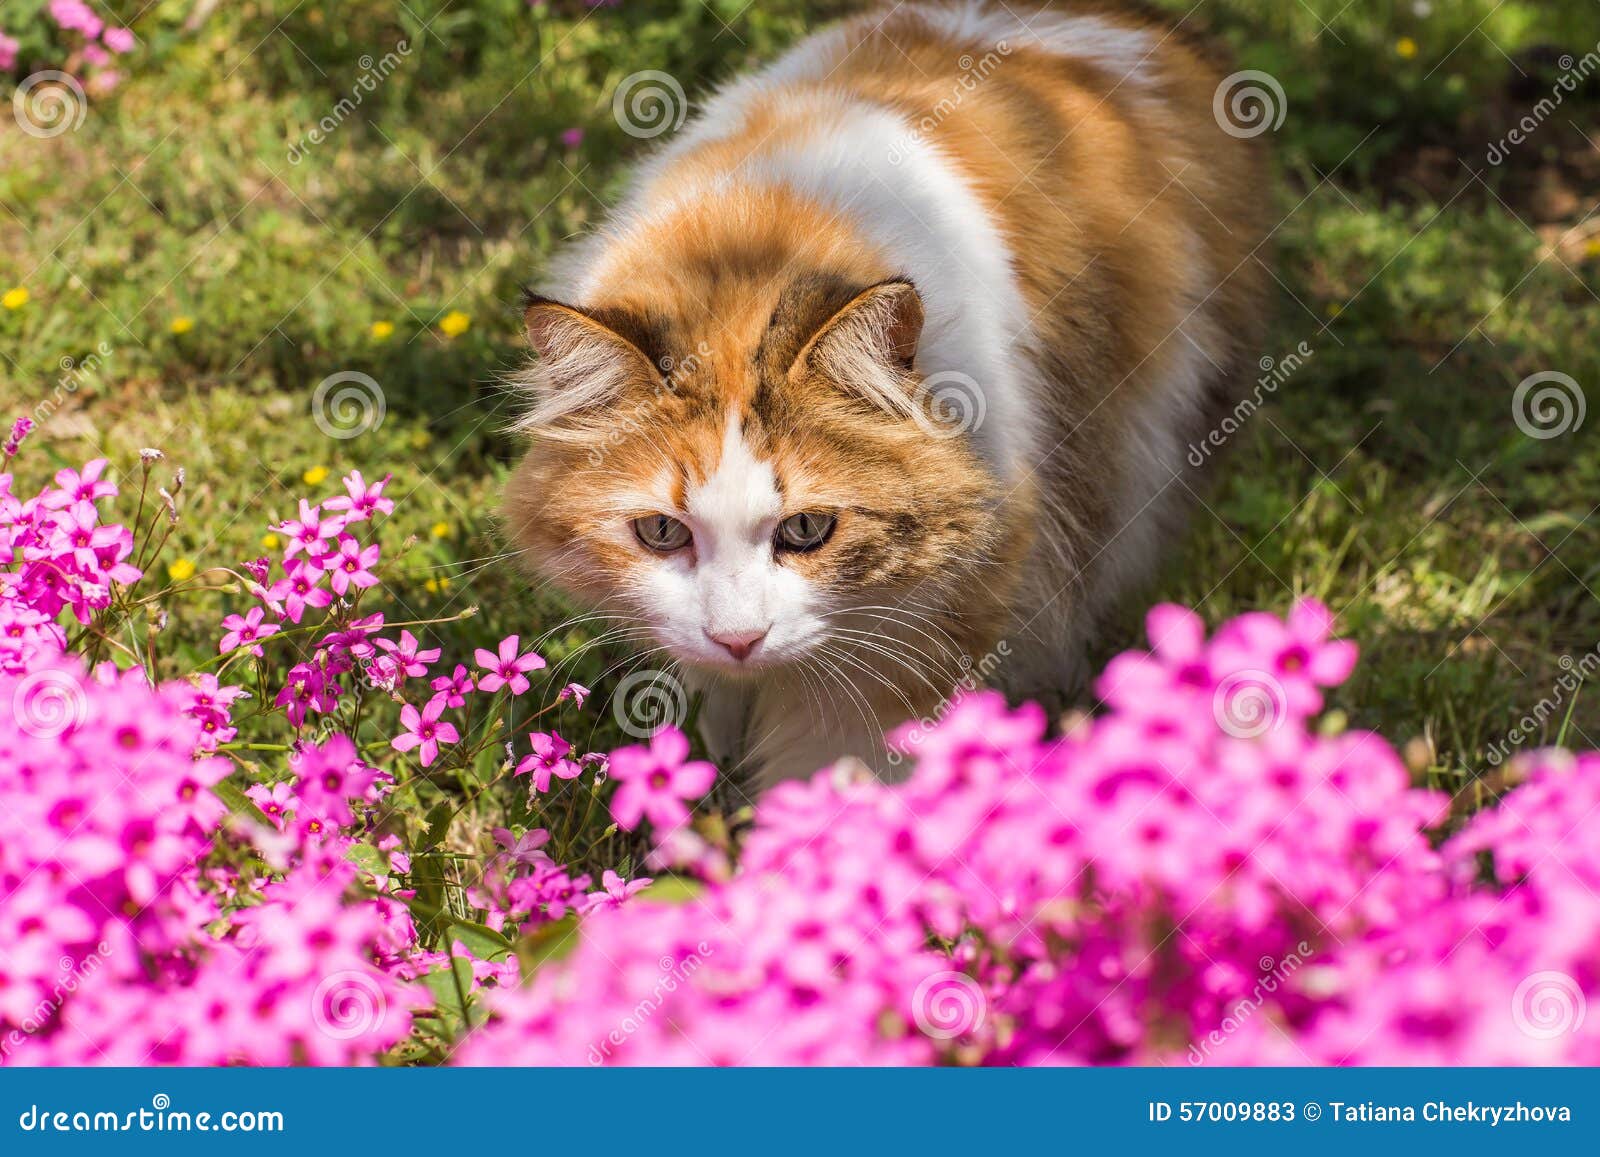 Cute cat in the flowers stock image. Image of flower - 57009883